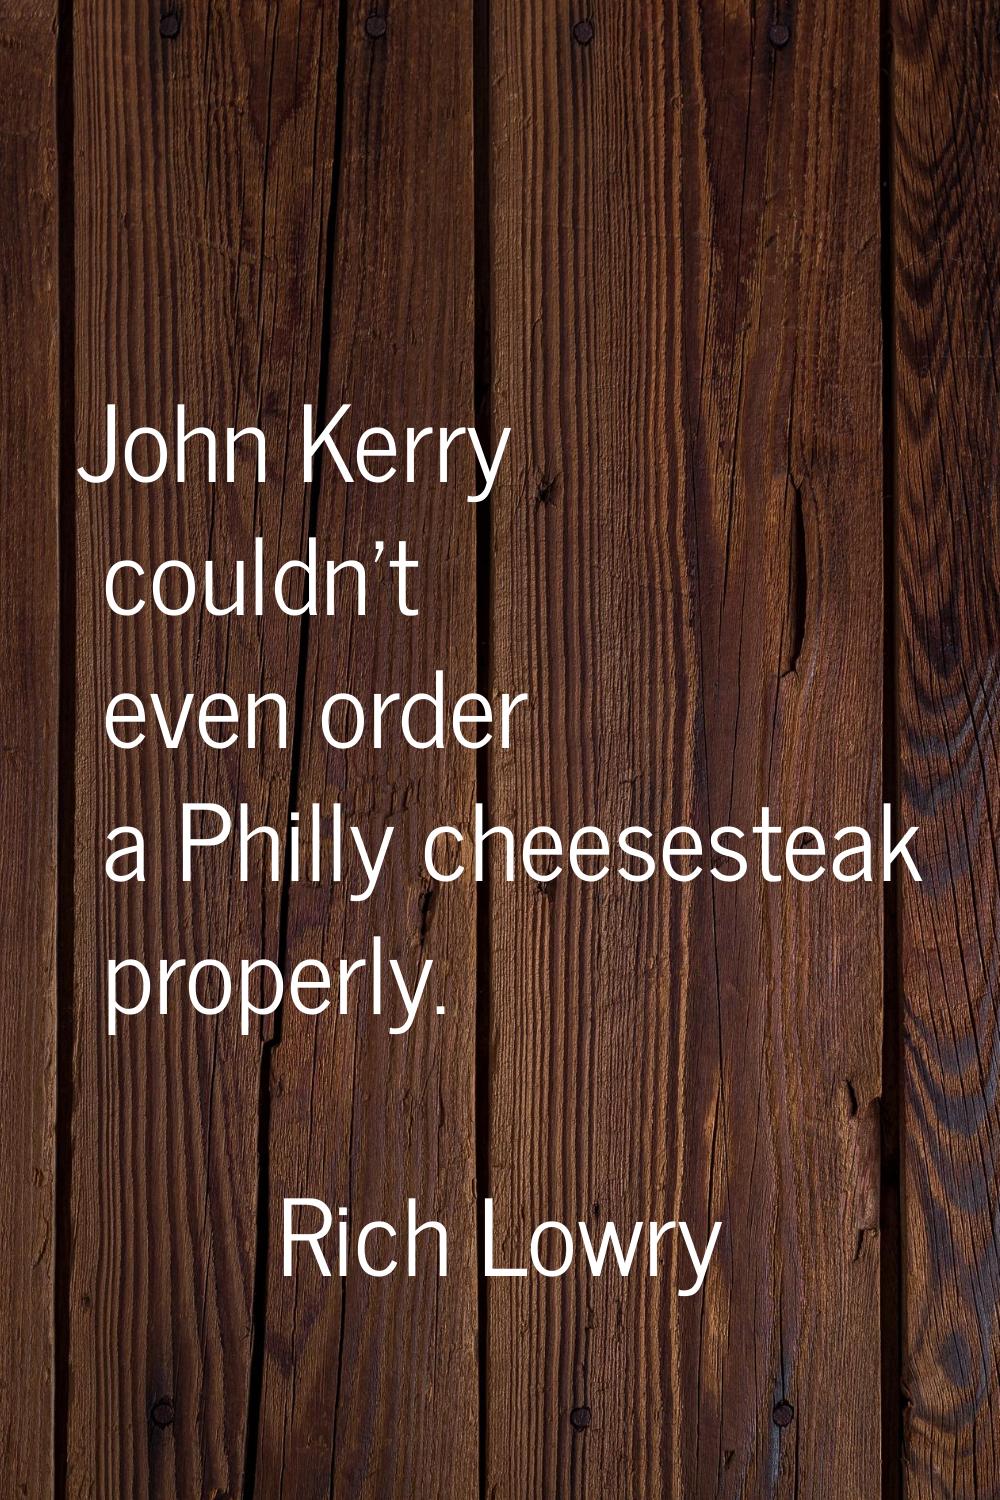 John Kerry couldn't even order a Philly cheesesteak properly.